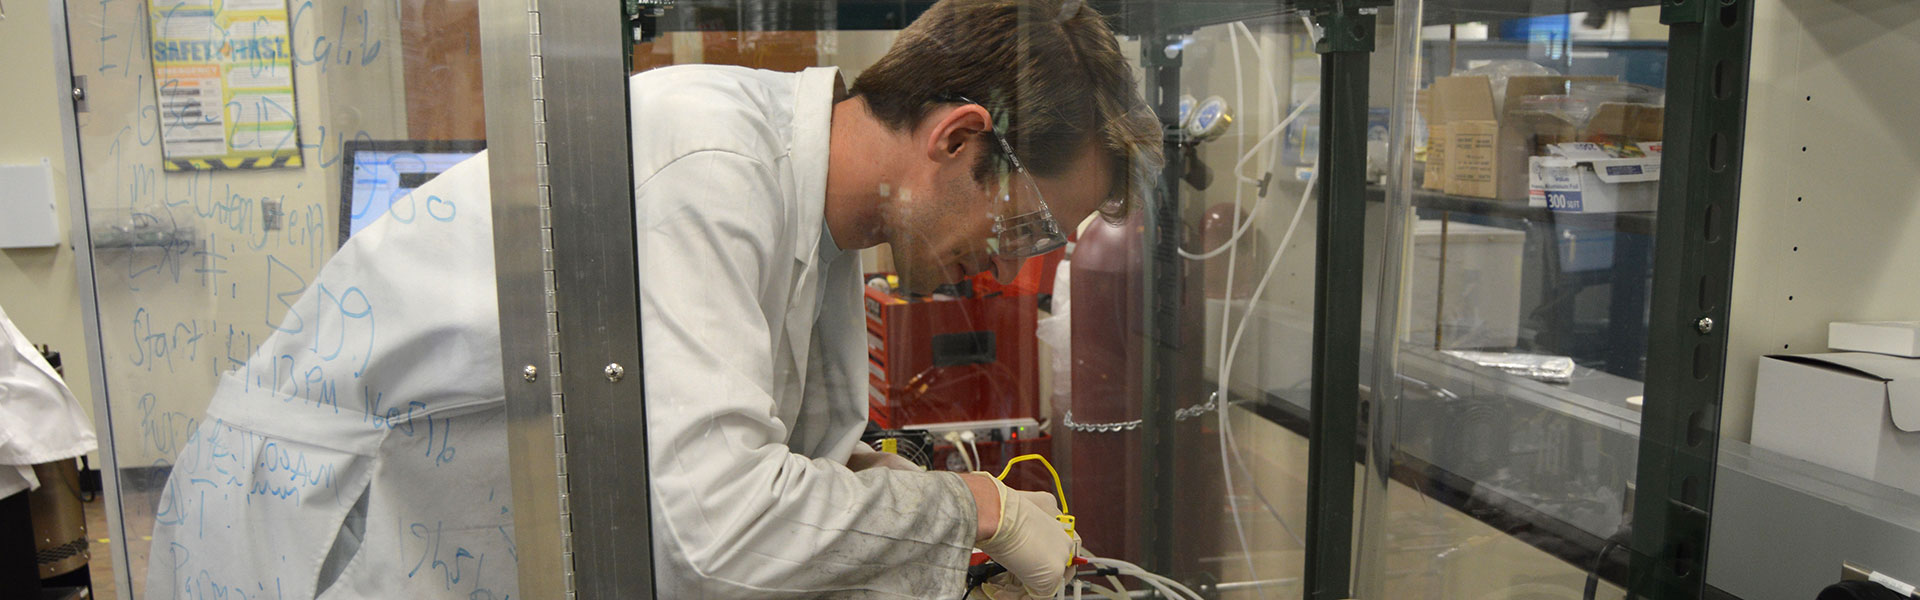 Graduate student at work in a lab